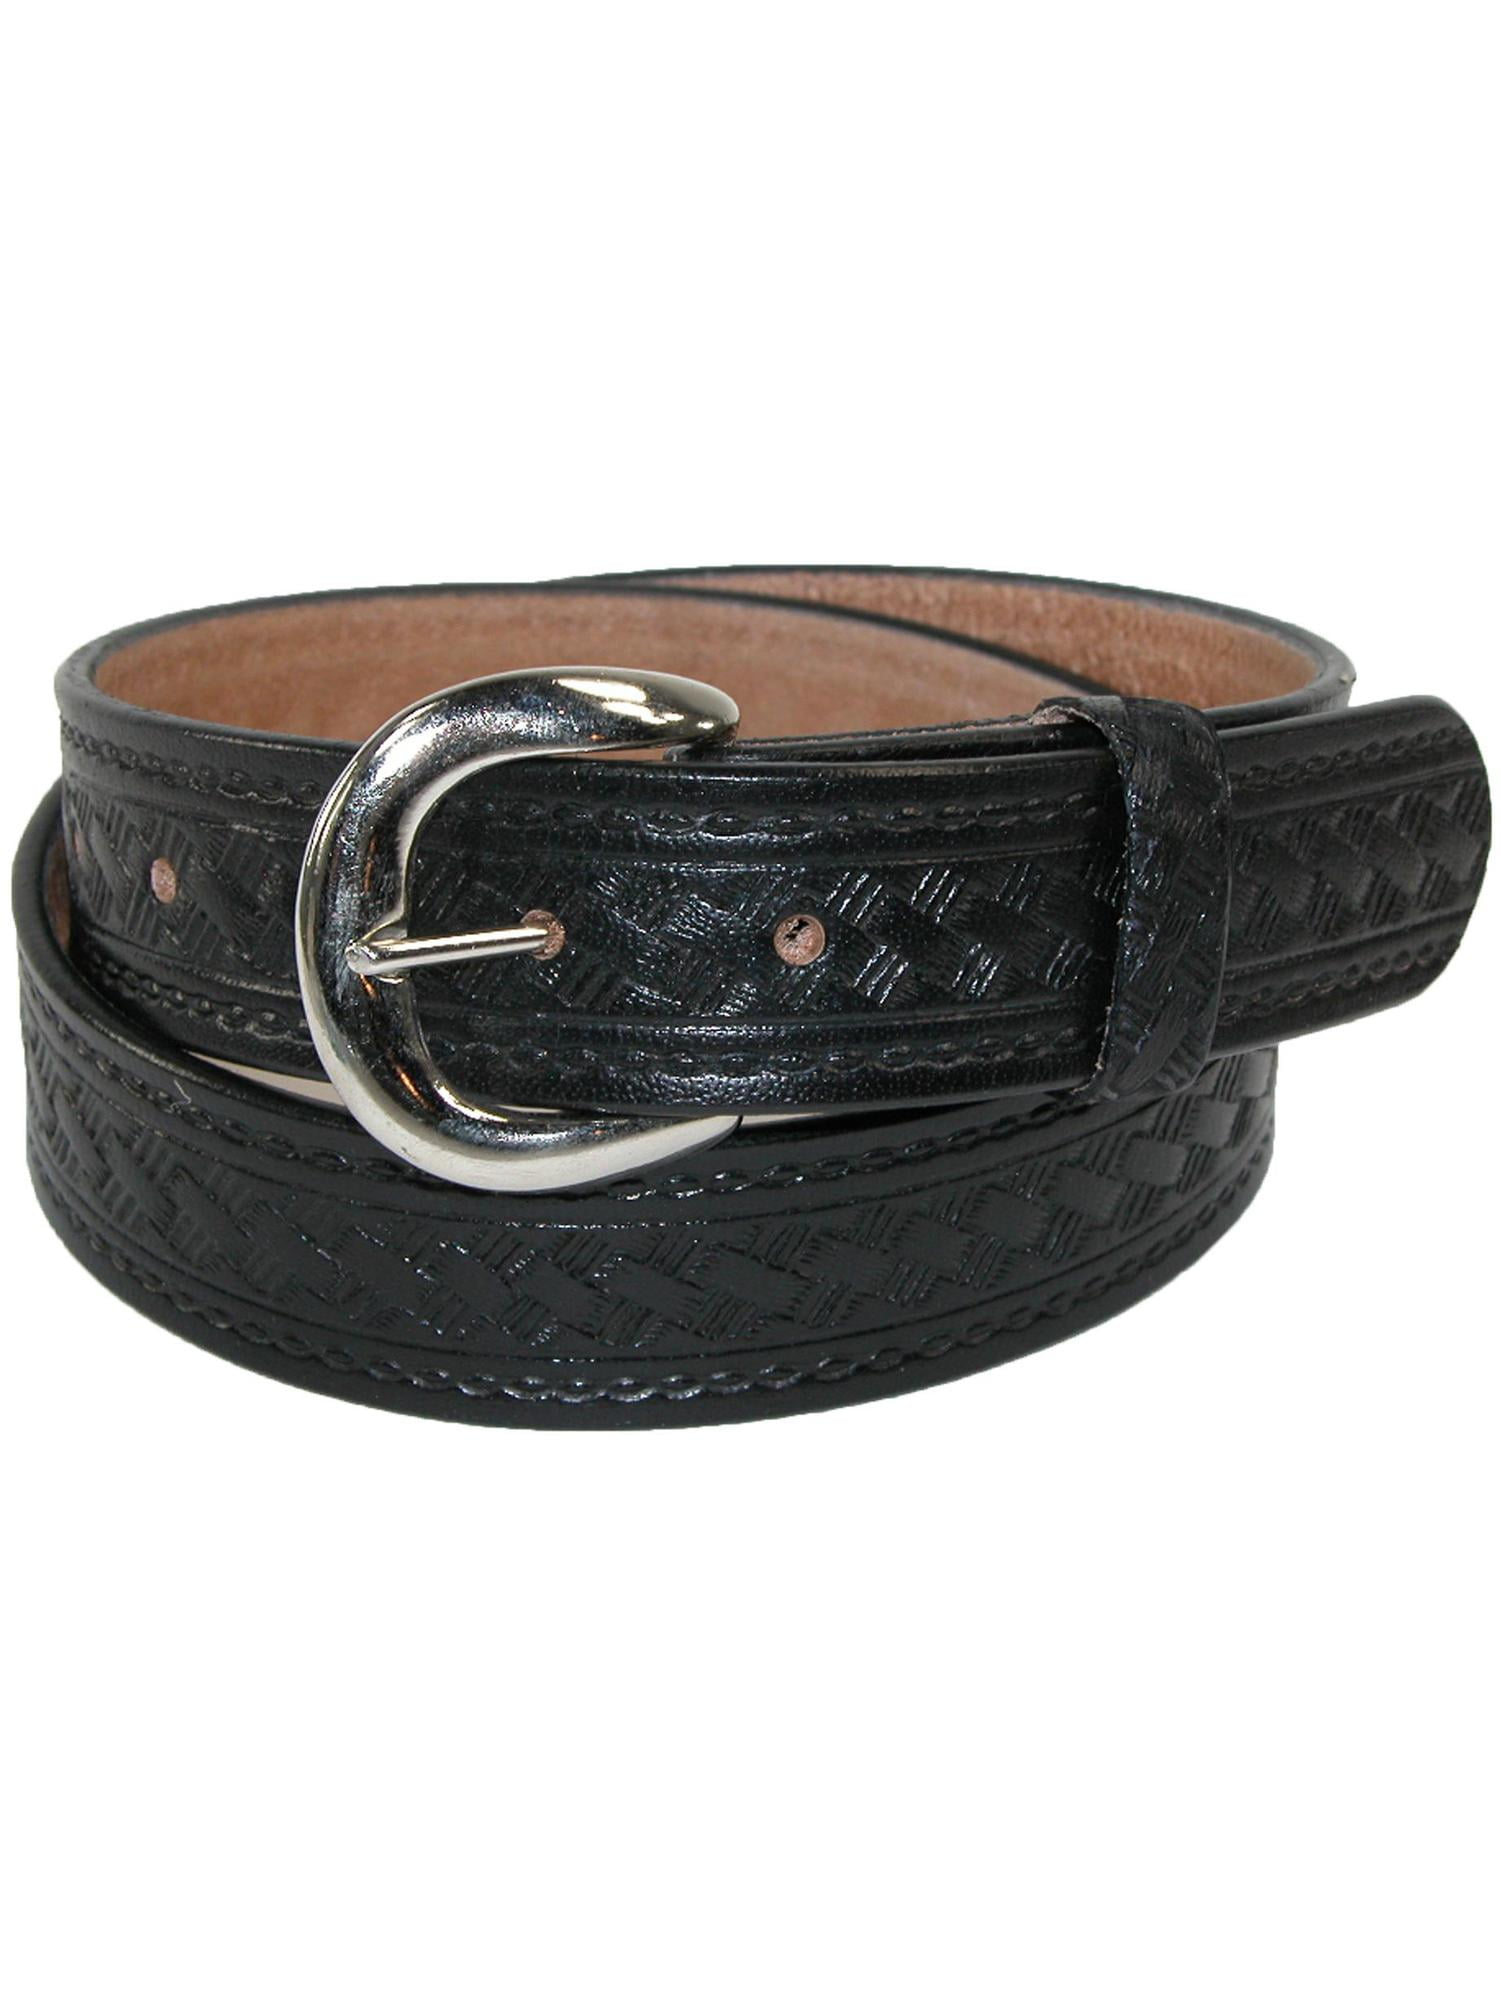 Genuine Country and Western Leather Belt Removable Buckle Made in USA Mens Belts 